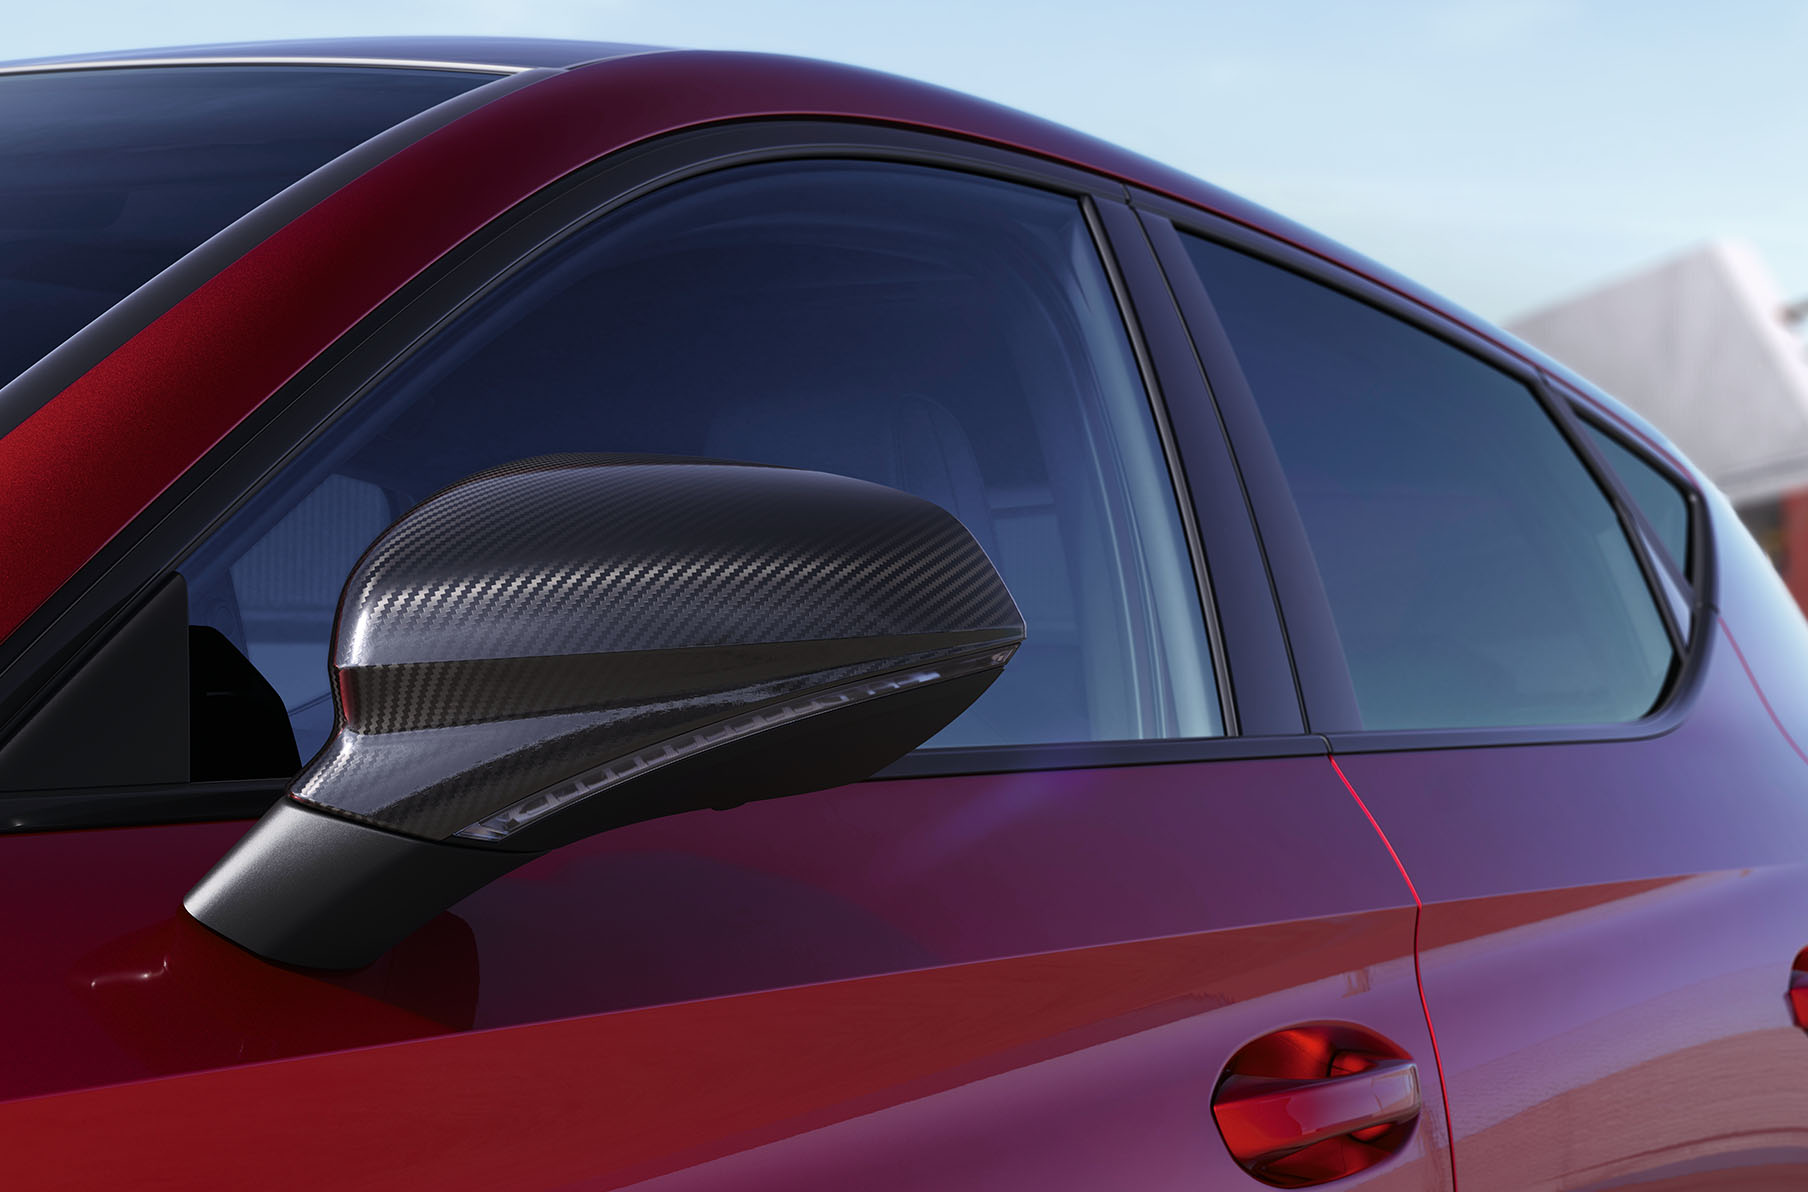 seat leon desire red colour with carbon fibre mirror covers